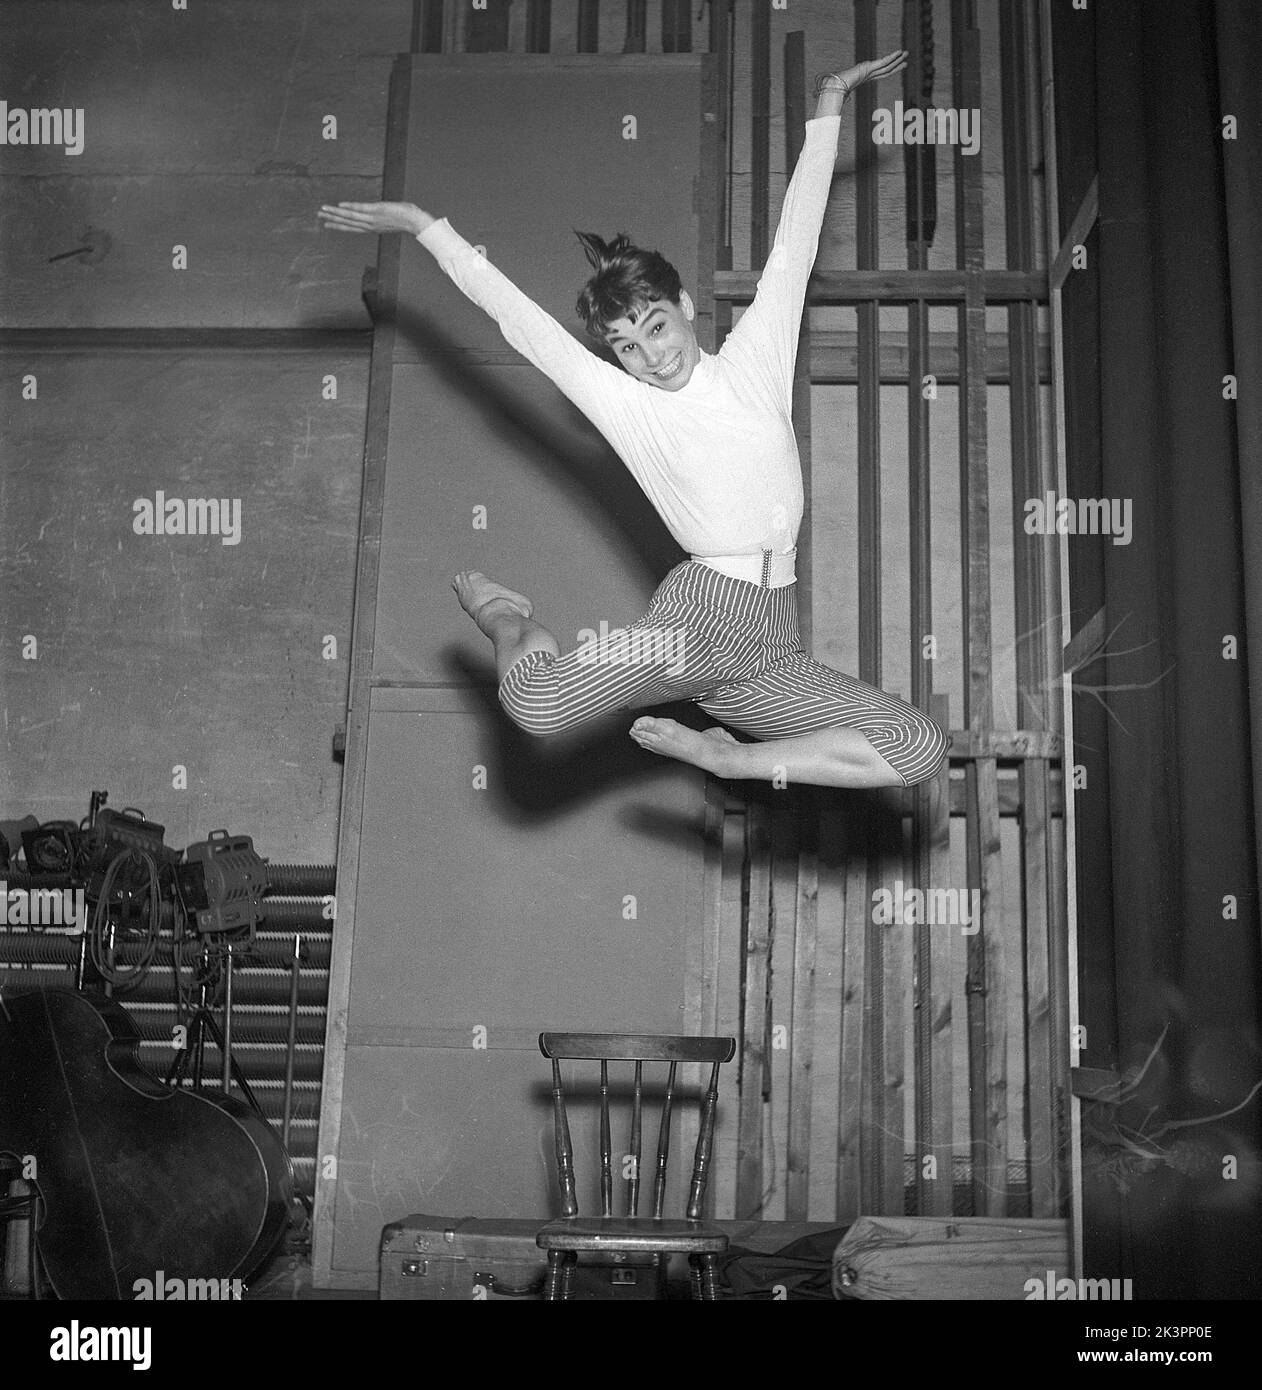 In the 1950s. An unknown young woman is pictured in the moment when being highest in the air having jumped off the chair. Besides the height of the jump she even manages to smile, keep eyecontact with the photographer and position her arms and legs in an artistic pose.  Sweden 1954 Kristoffersson ref BX38-7 Stock Photo